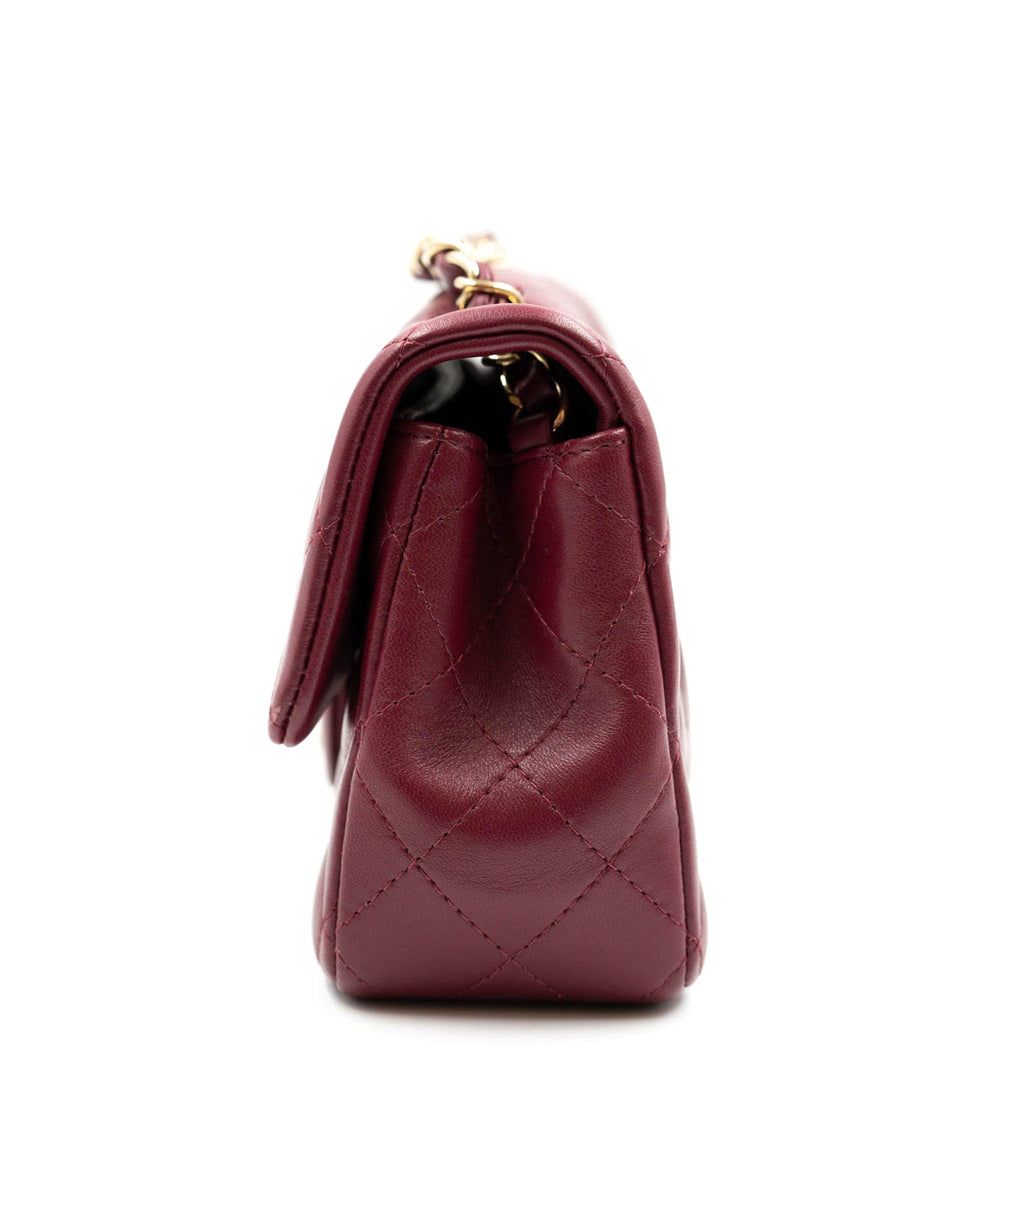 CHANEL Caviar Quilted Extra Mini Flap Burgundy 256841